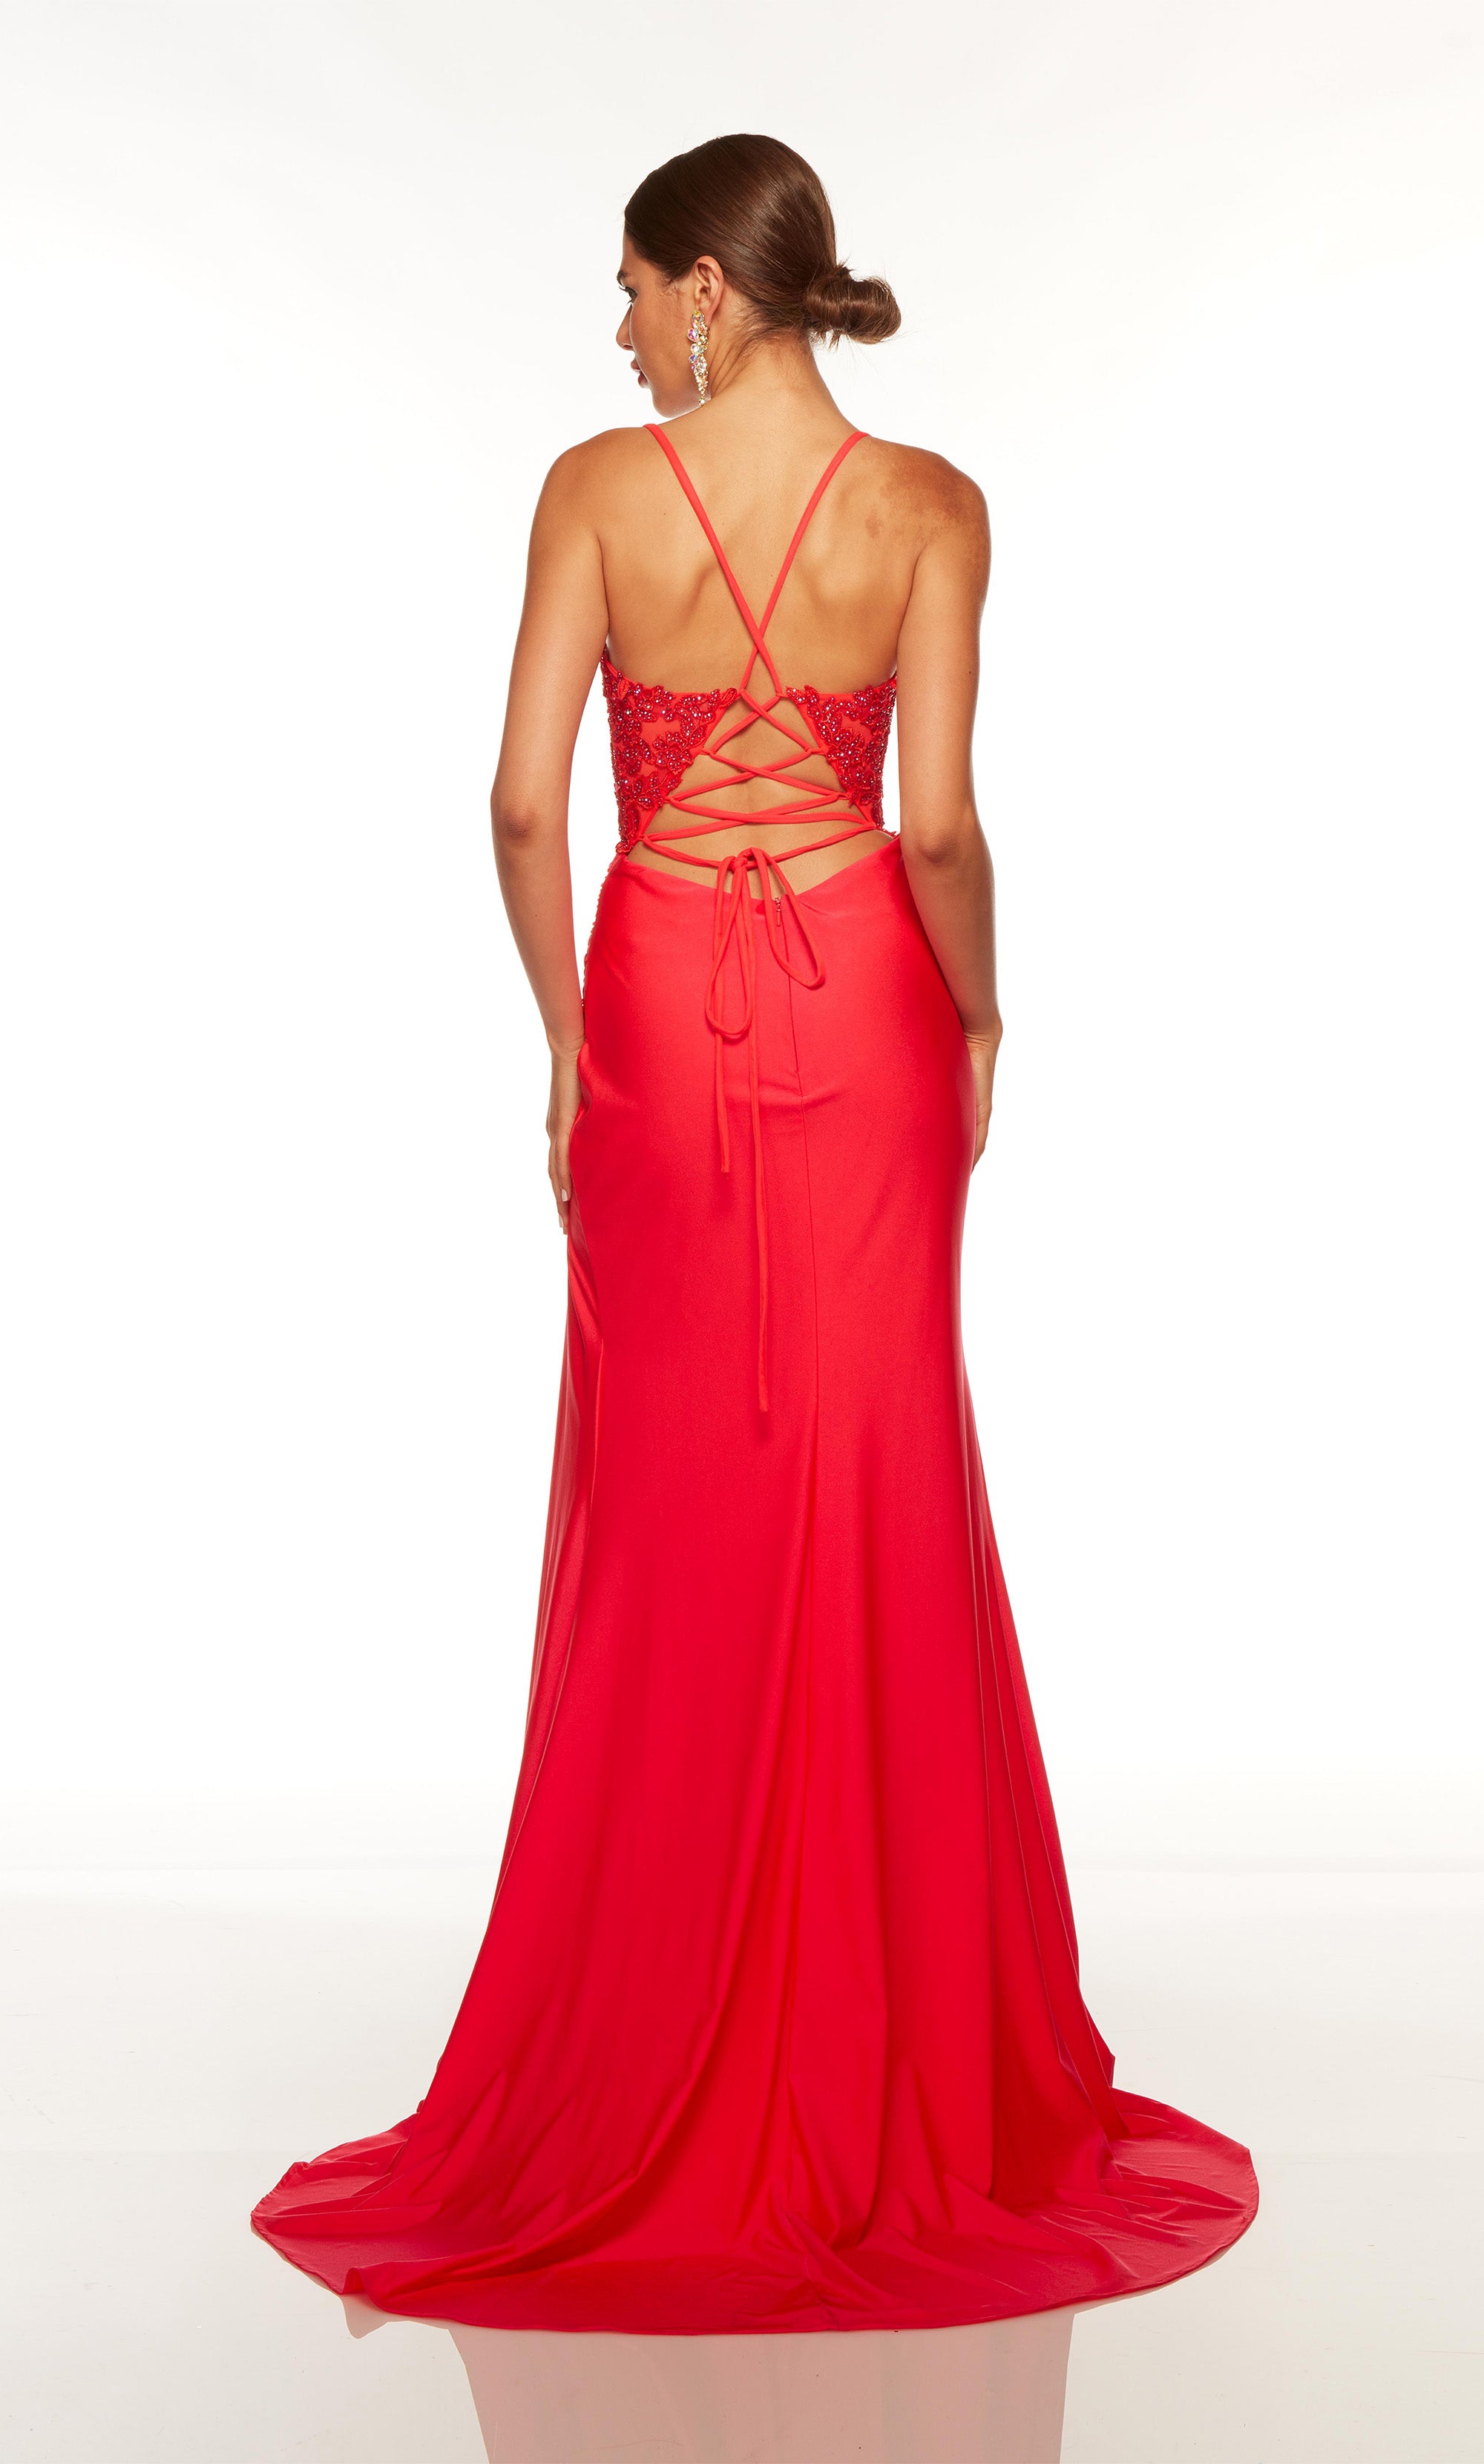 Corset prom dress with a sheer lace bodice, ruching detail, and high slit in red. COLOR-SWATCH_61469__WATERMELON